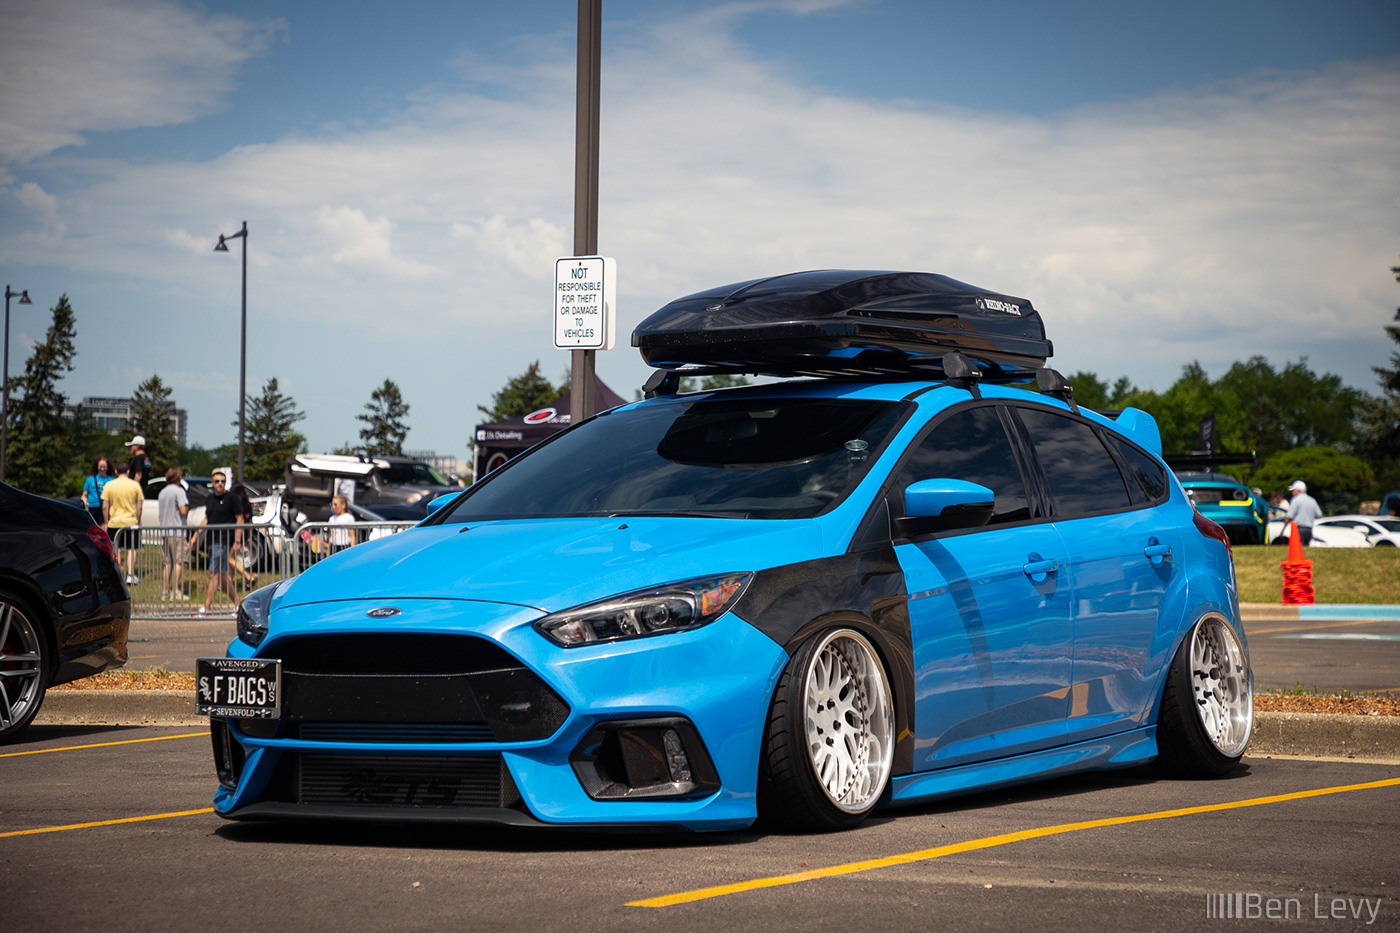 Modded Focus RS in the Parking Lot